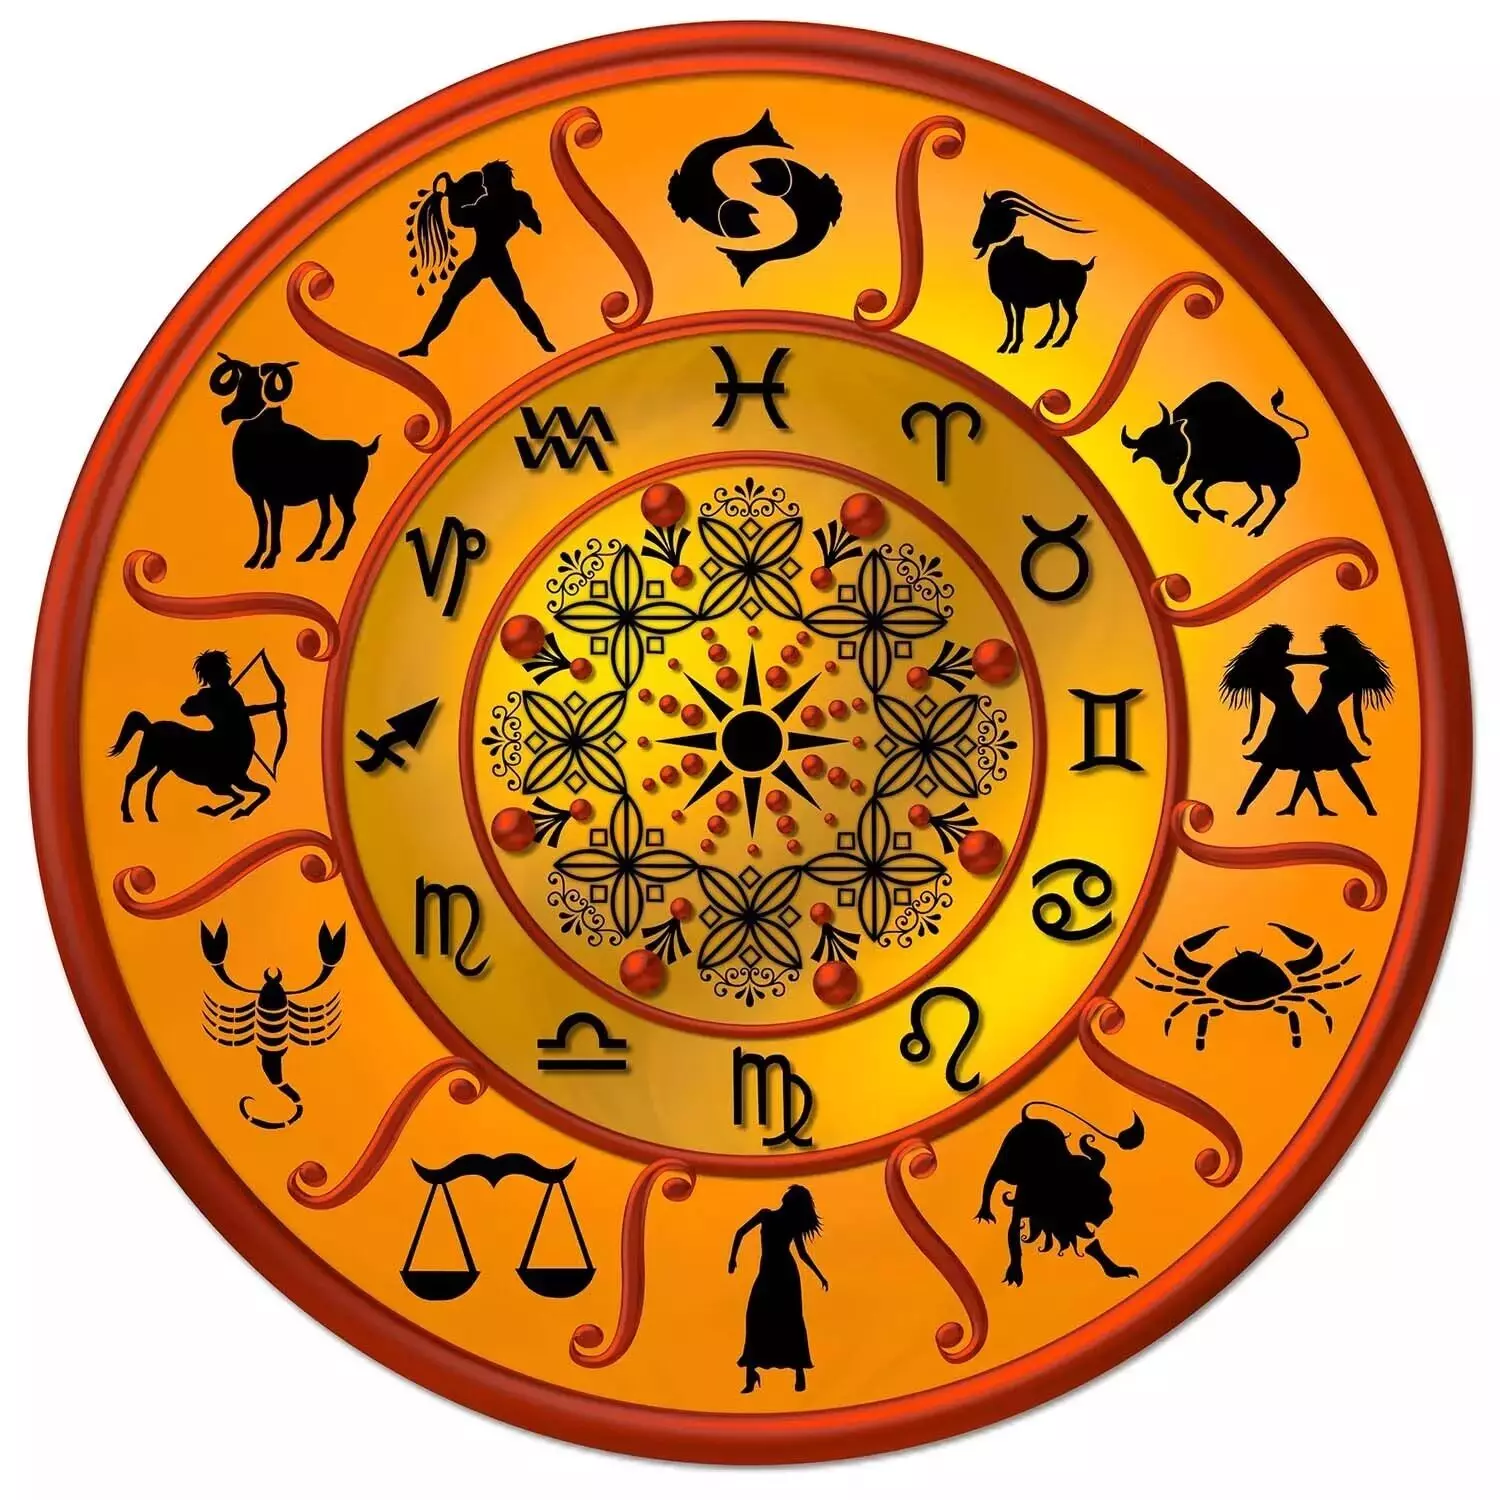 29 September  – Know your todays horoscope